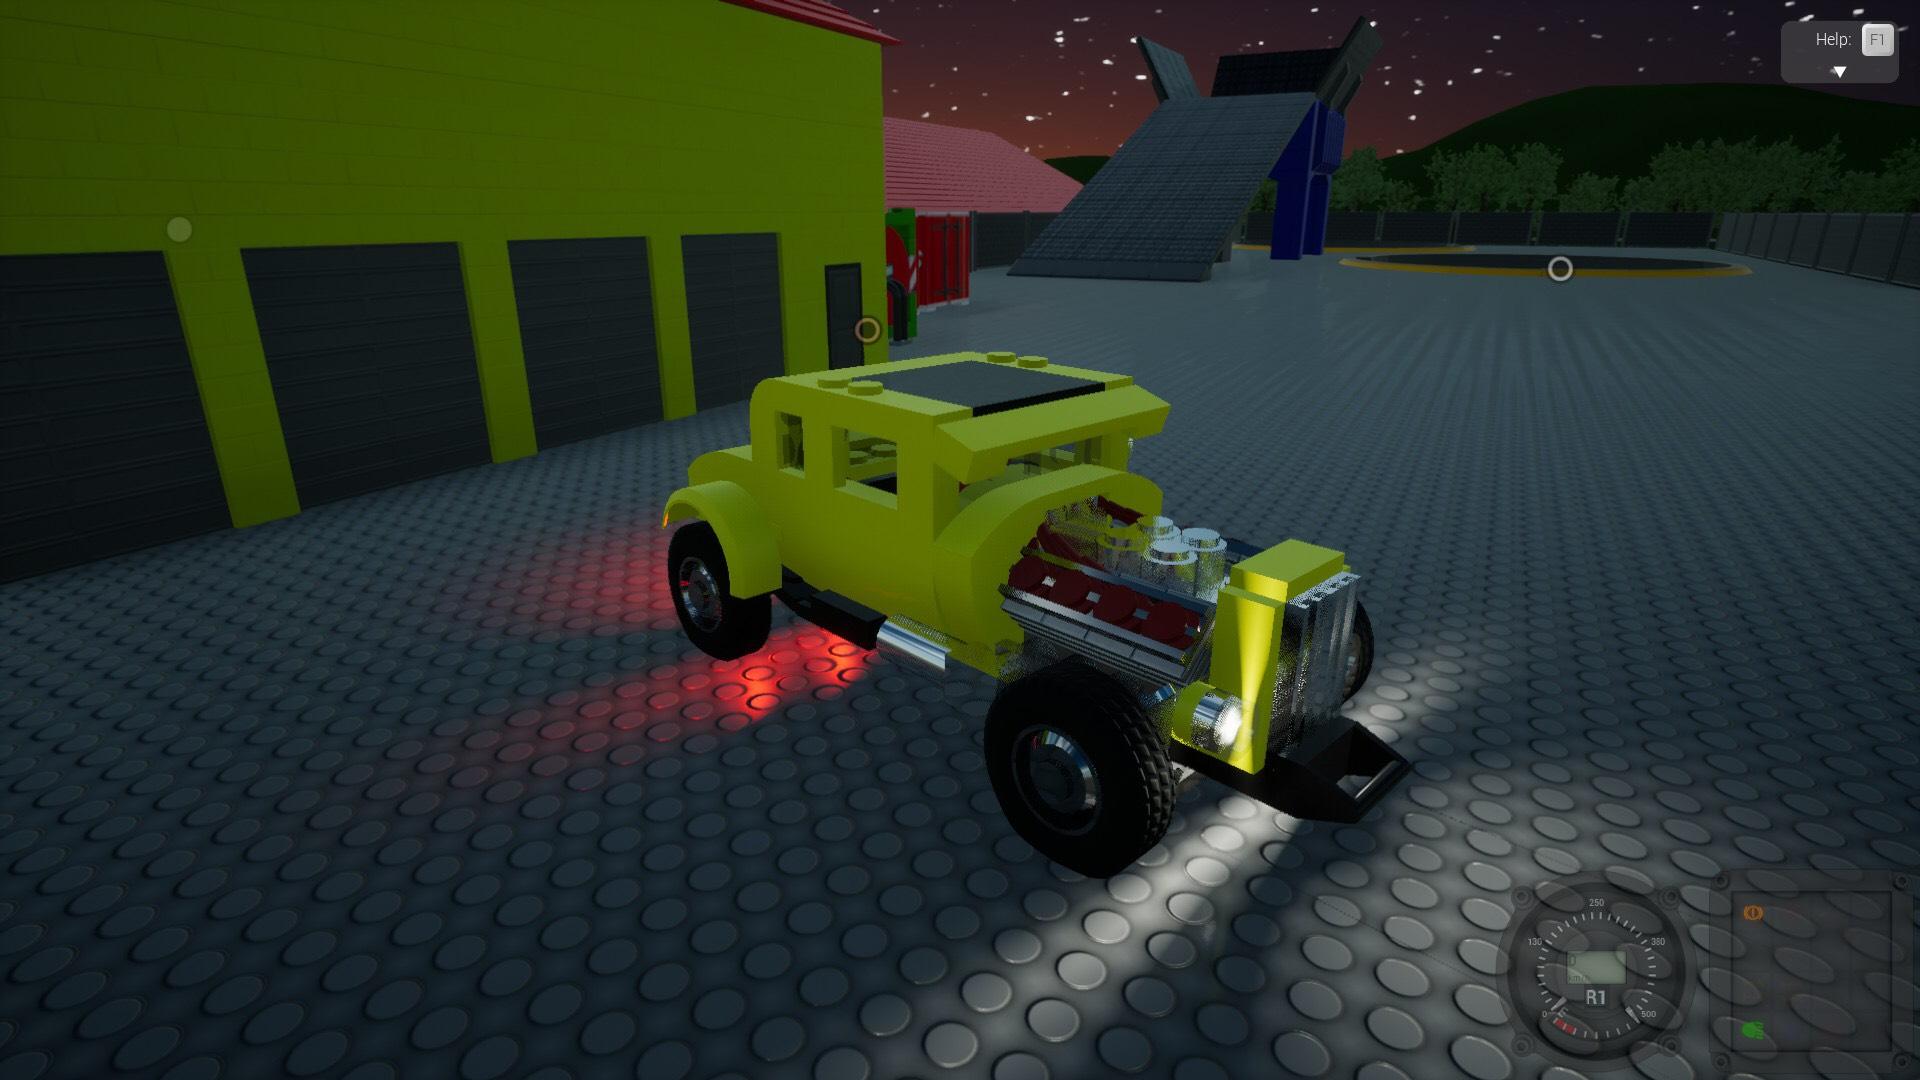 Some Sorta 31 32 Ford Combination I Made In Brick Rigs. Guess What